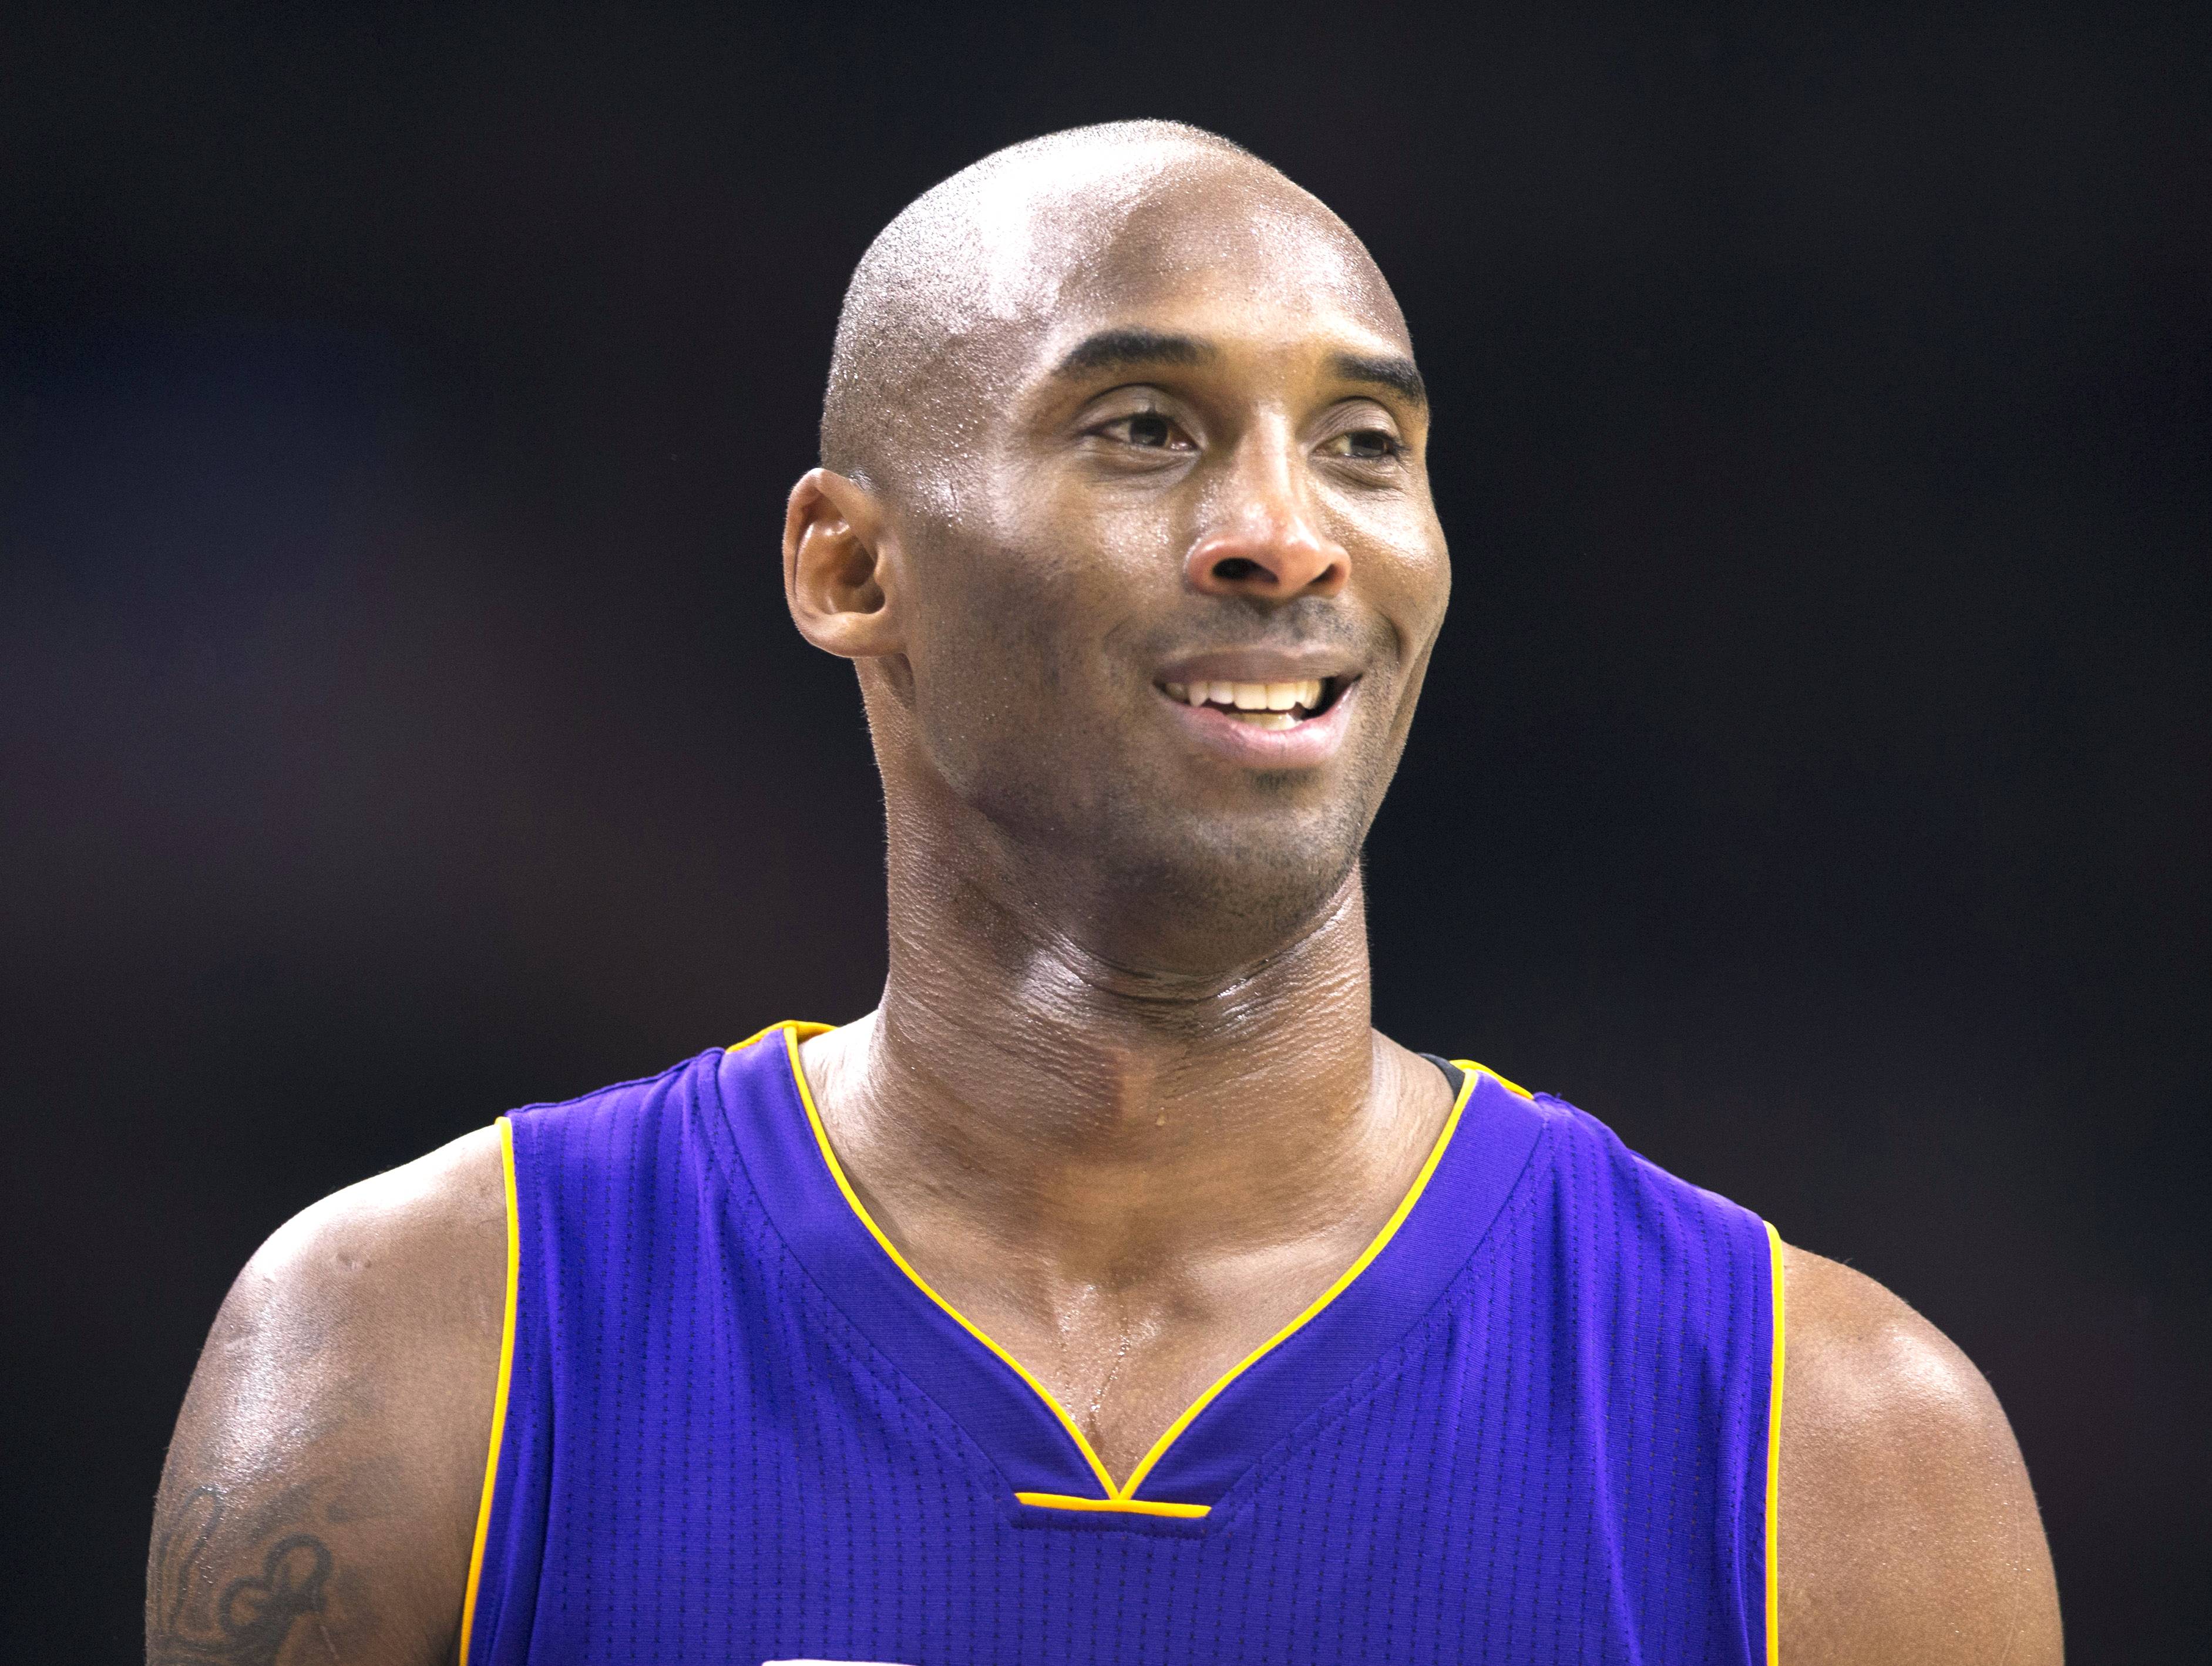 Kobe Bryant says he won't play for Team USA in 2016 Olympics - NBC Sports